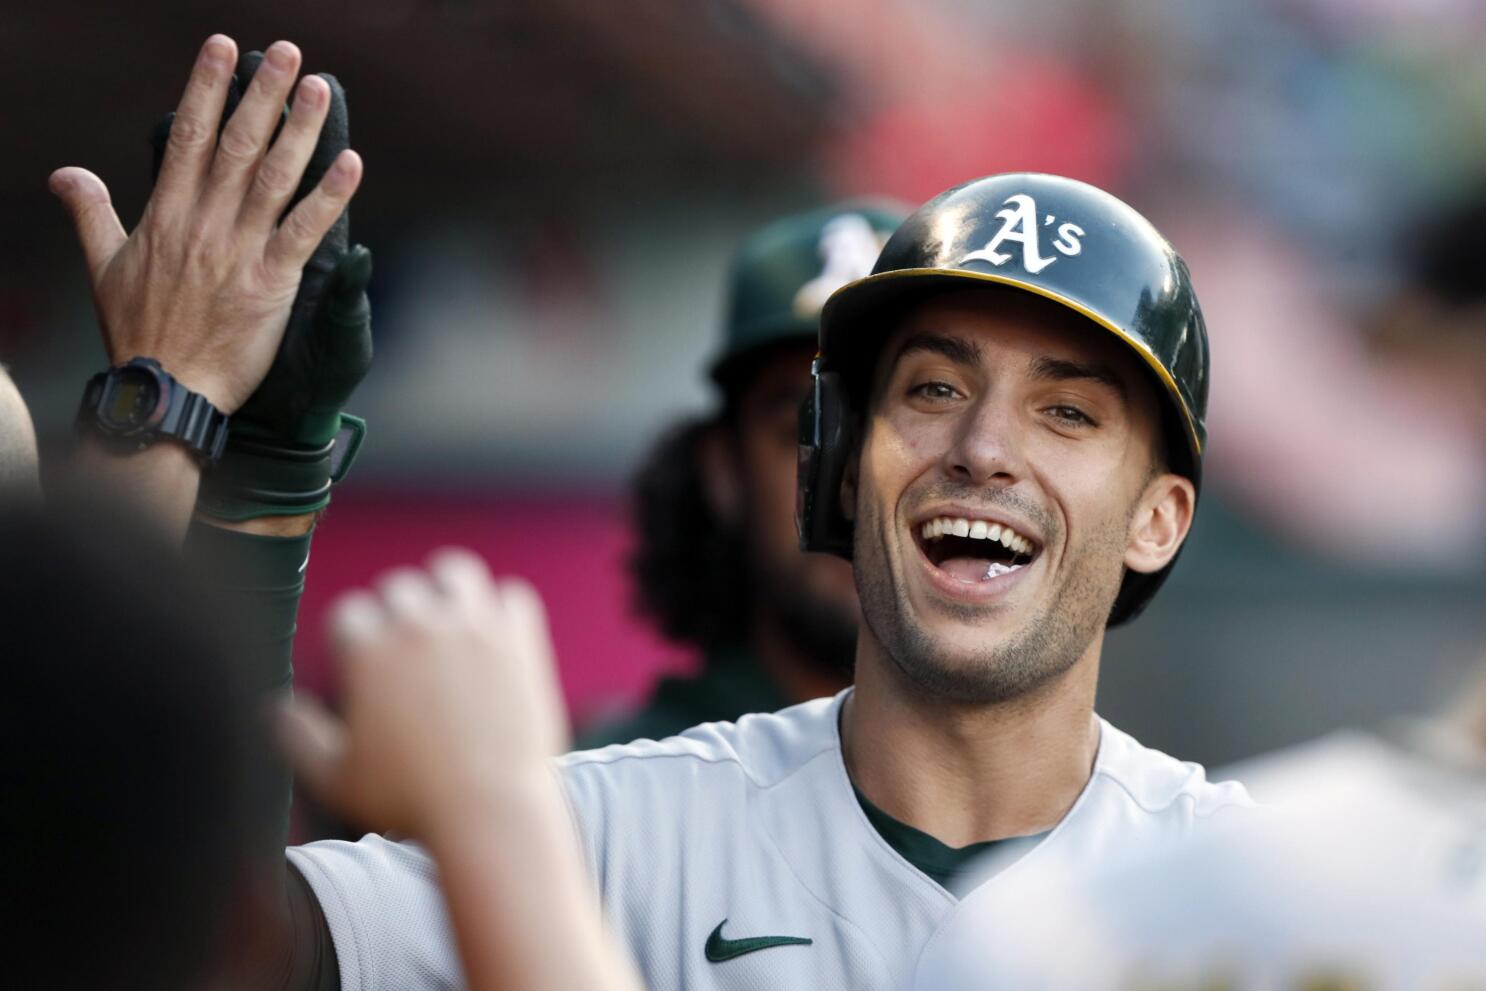 MLB: With Freeman a free agent, Braves get star 1B Olson from A's